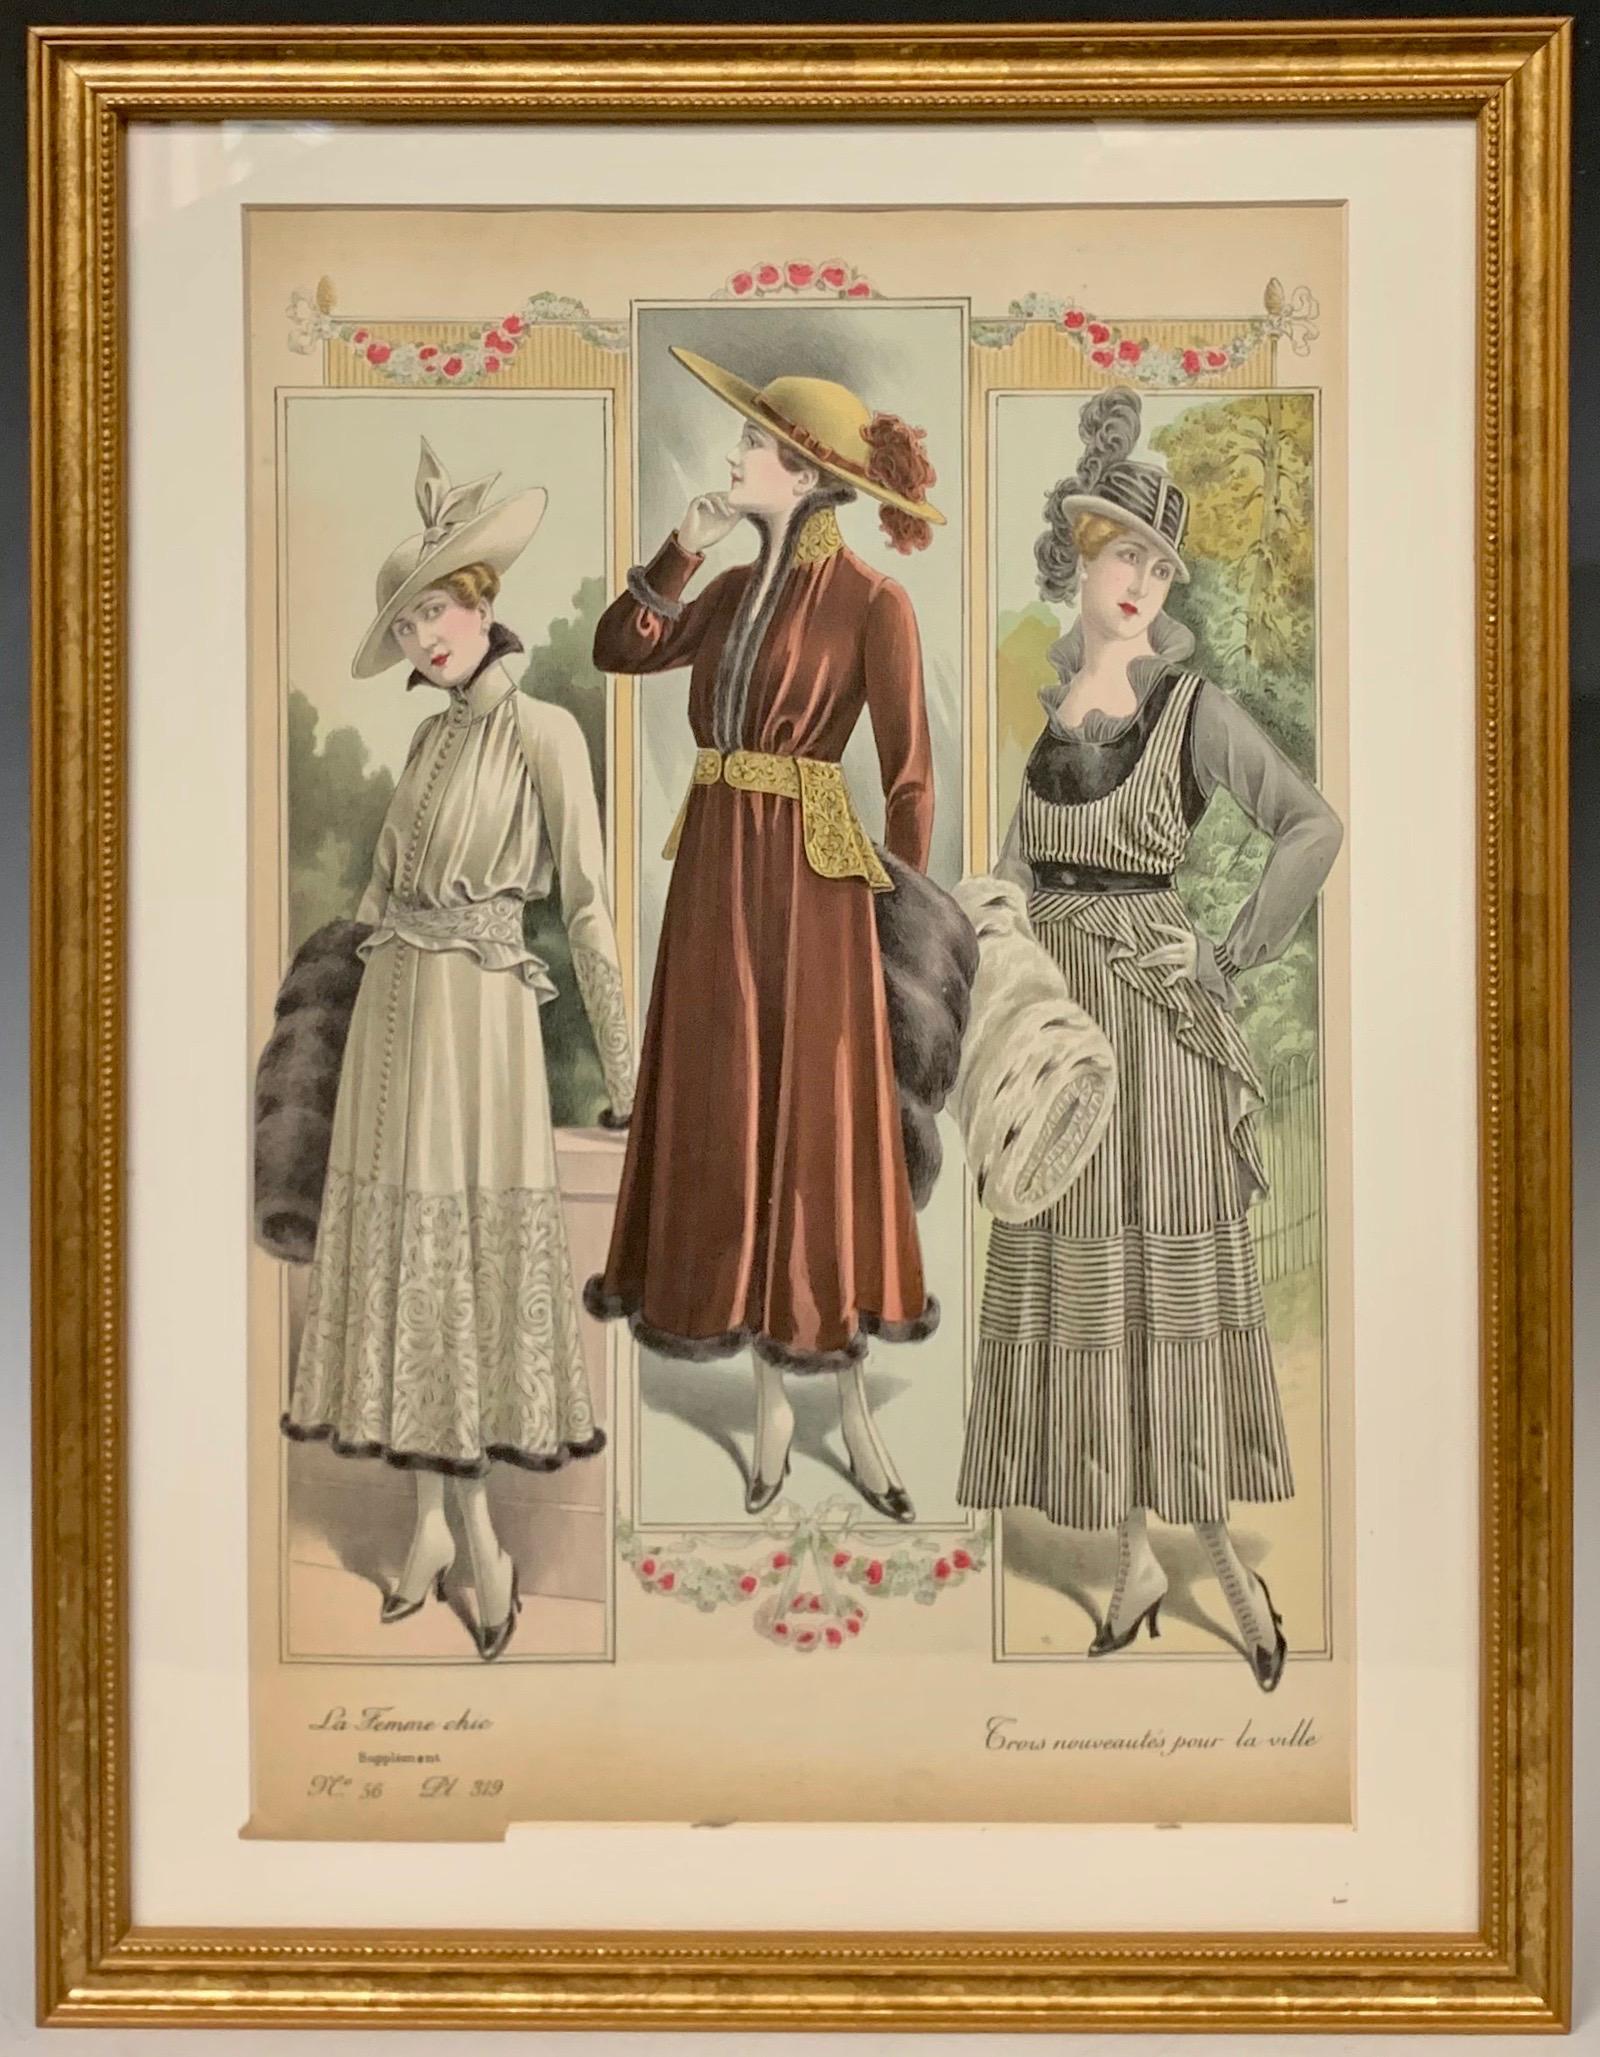 Set of twelve framed original color lithographs of French fashions from 'La Femme Chic' 1914. La Femme Chic was an important French periodical that debuted in the early 1900s and showed designs of French couturiers of the period, in vibrant color,